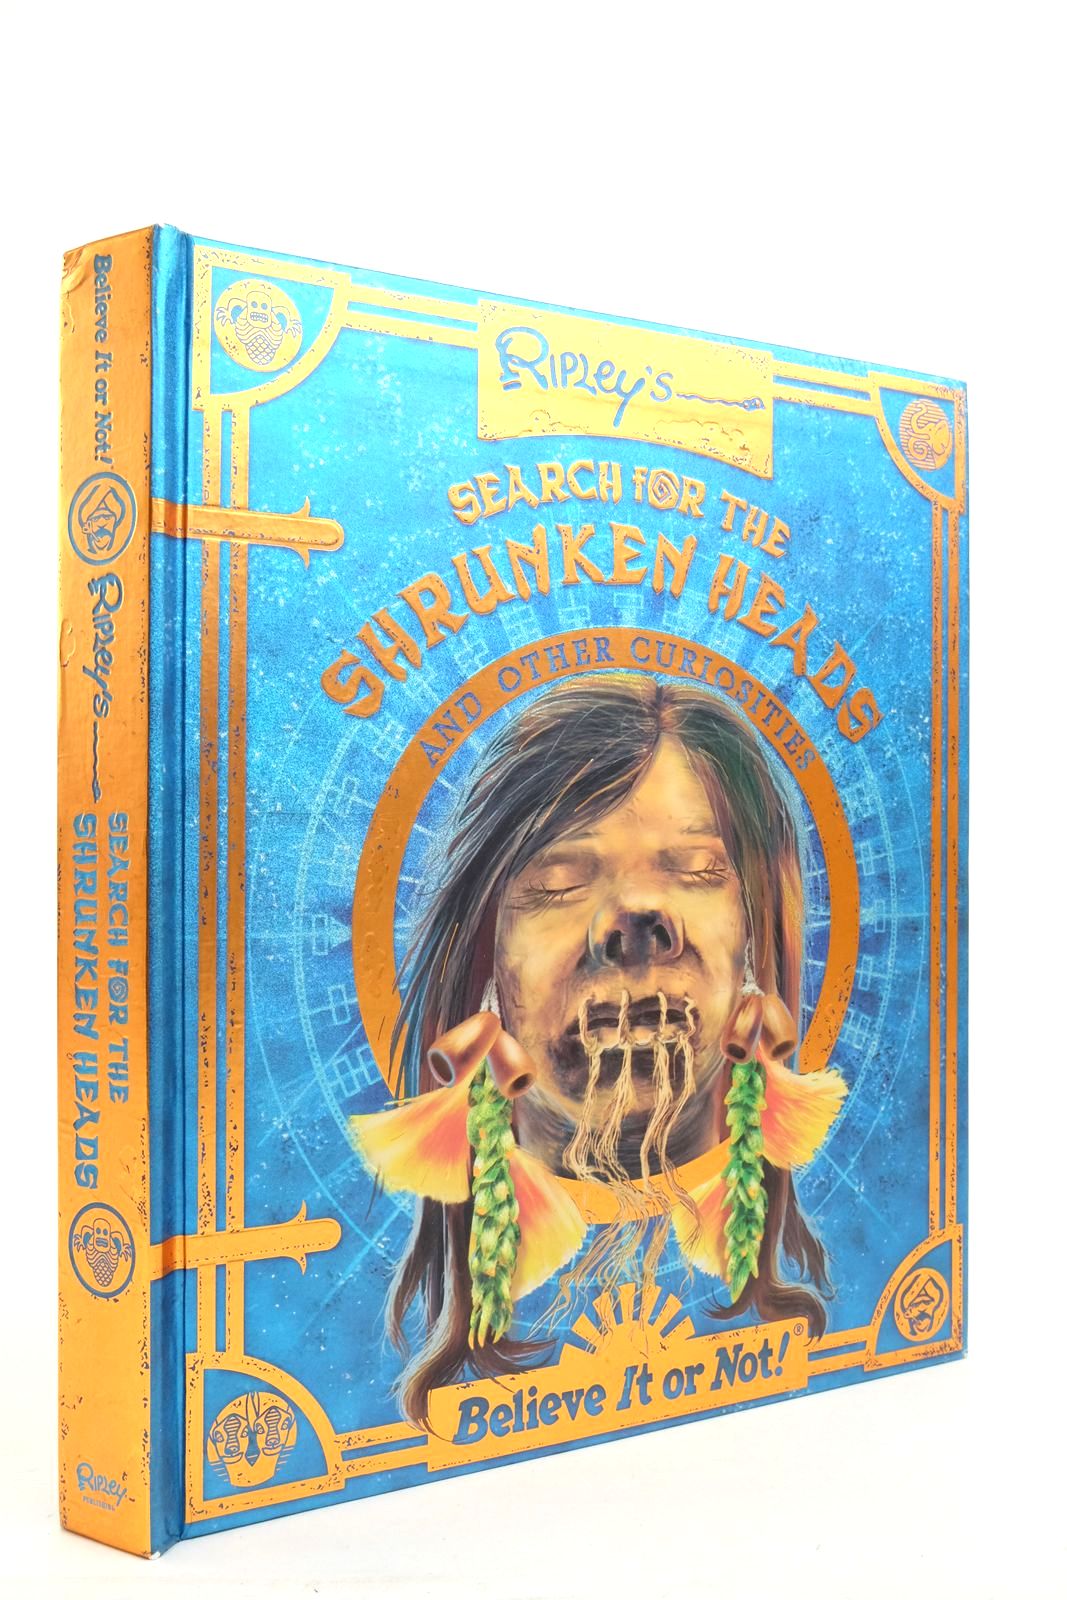 Photo of RIPLEY'S SEARCH FOR THE SHRUNKEN HEADS AND OTHER CURIOSITIES- Stock Number: 2137350